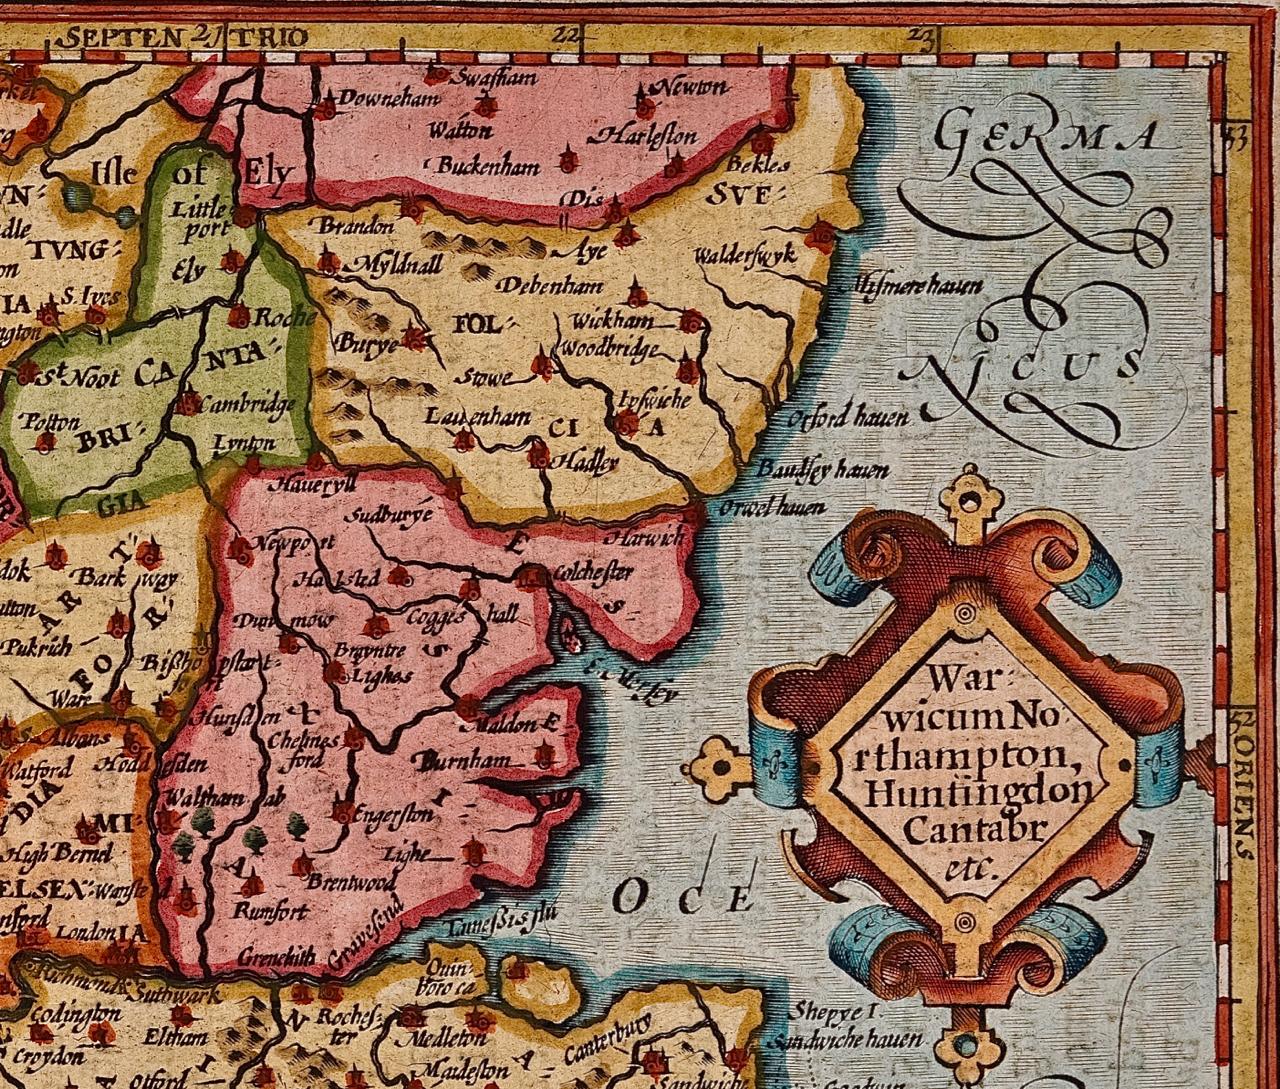 Southeastern England: A 17th Century Hand-Colored Map by Mercator and Hondius - Brown Print by Gerard Mercator